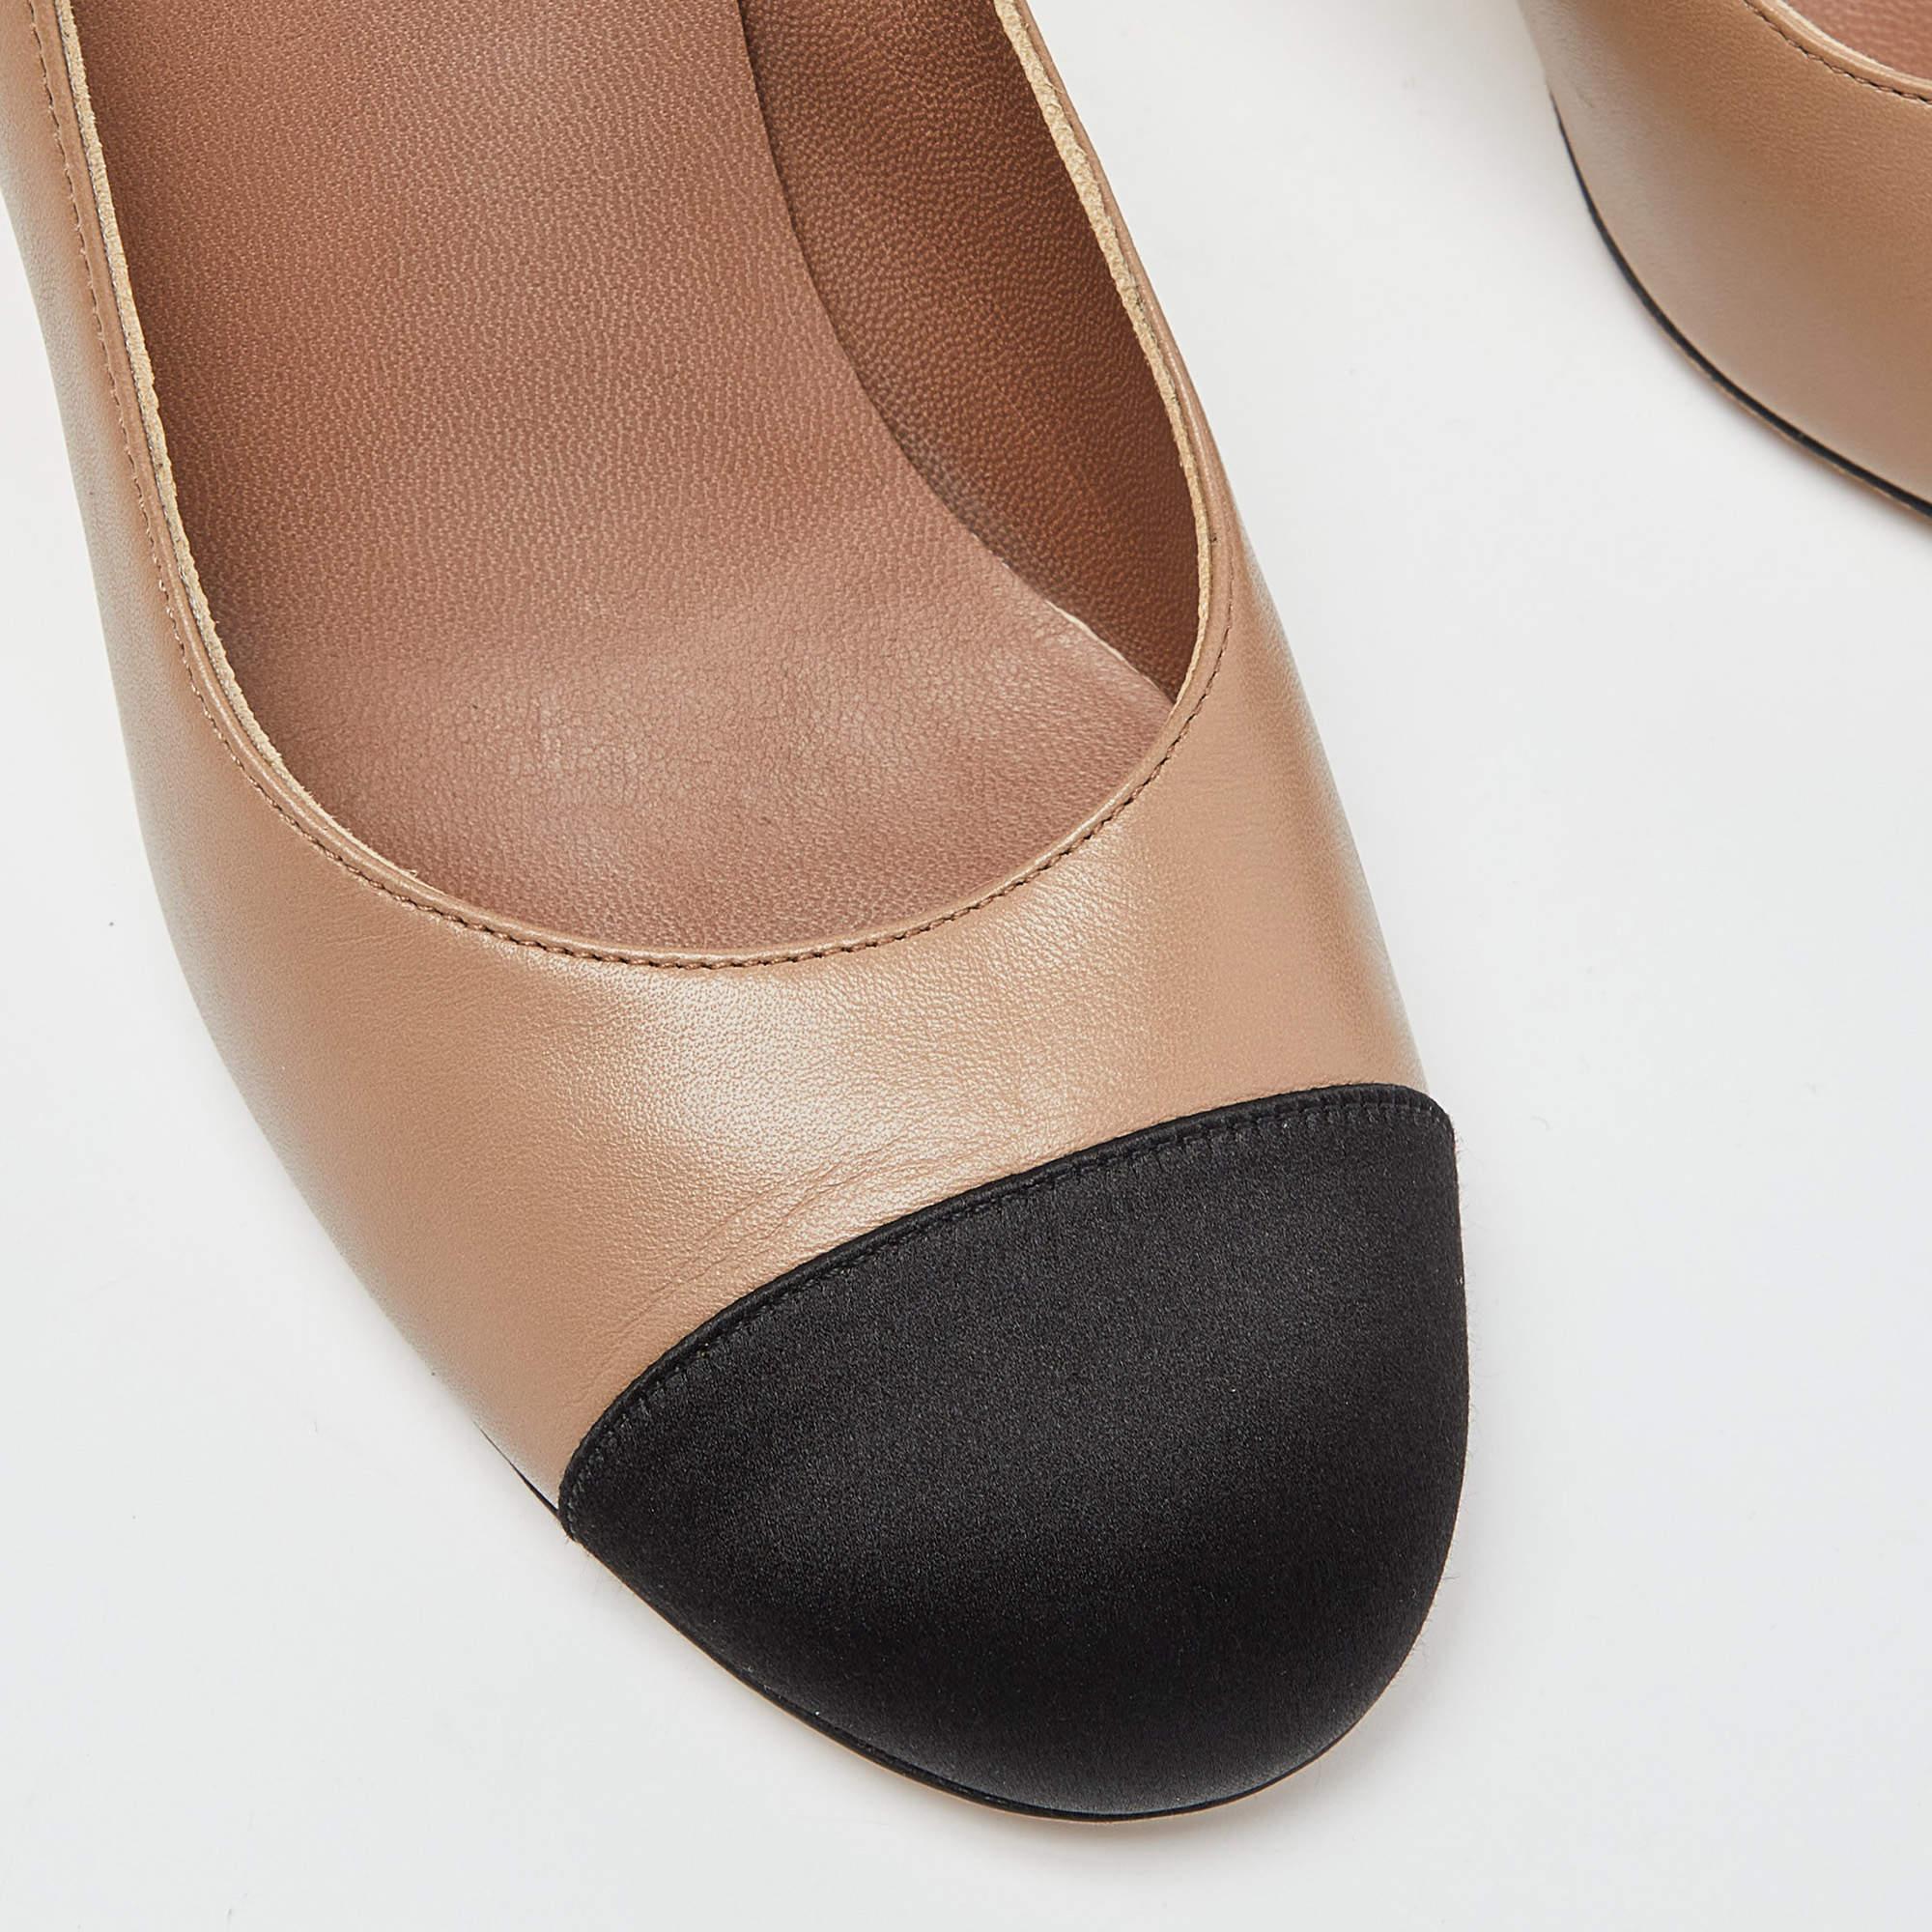 Brown Chanel Beige/Black Leather and Satin Cap Toe CC Pumps